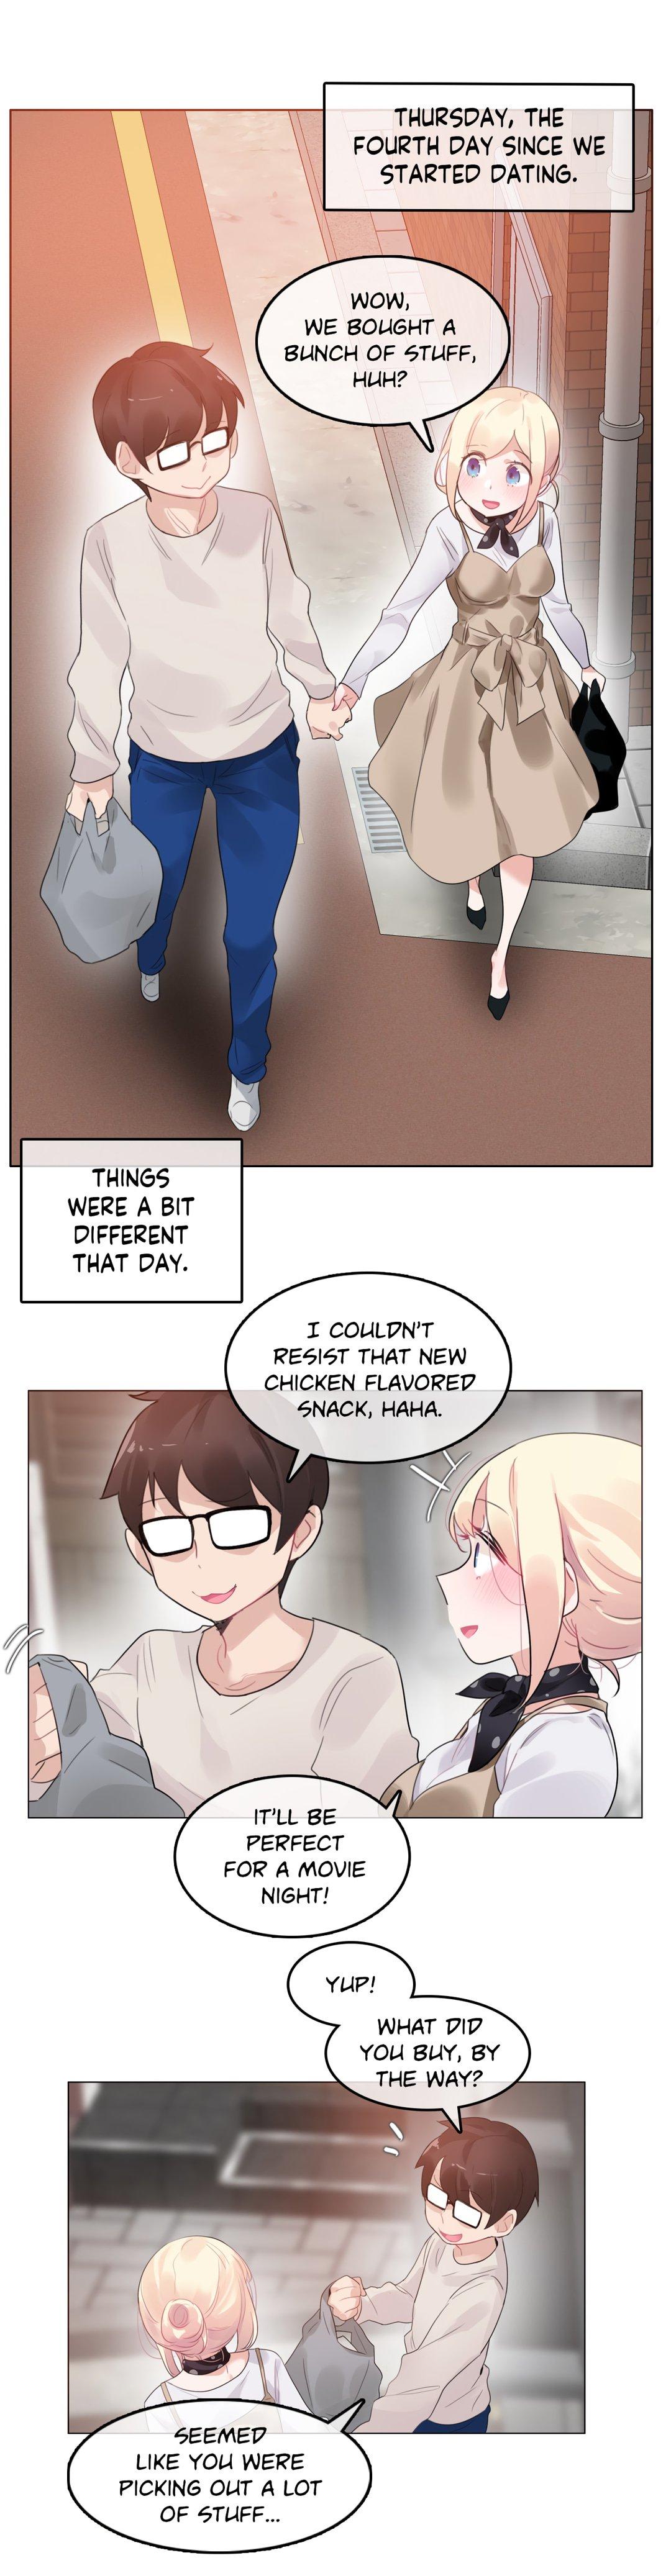 A Pervert's Daily Life • Chapter 56-60 11